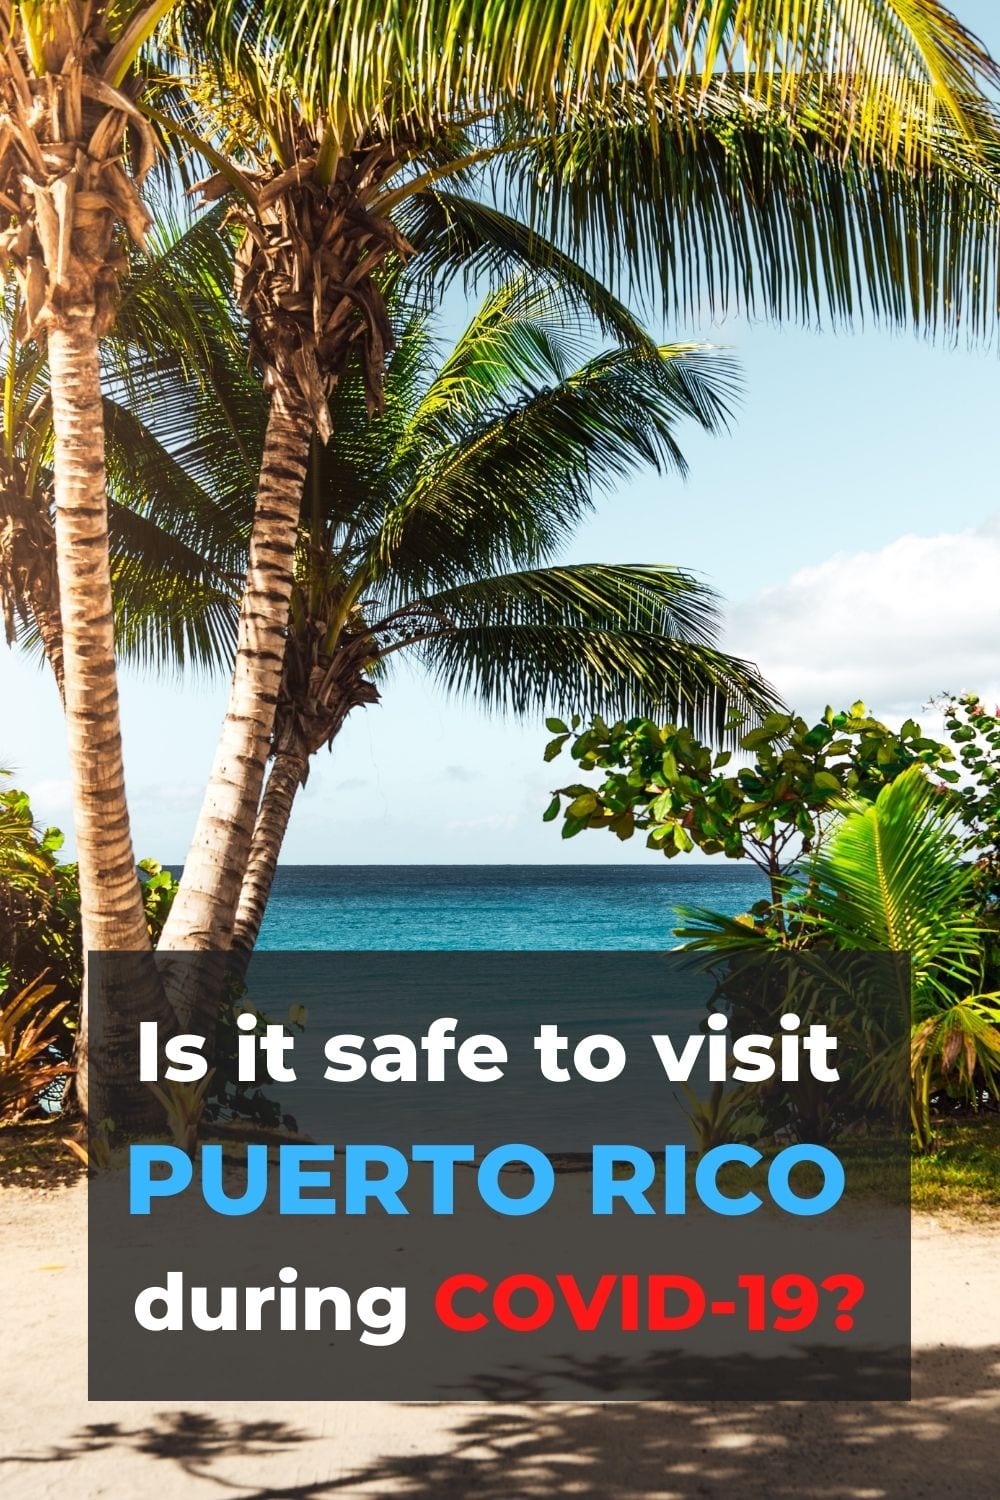 Is it safe to travel to PUERTO RICO right now?